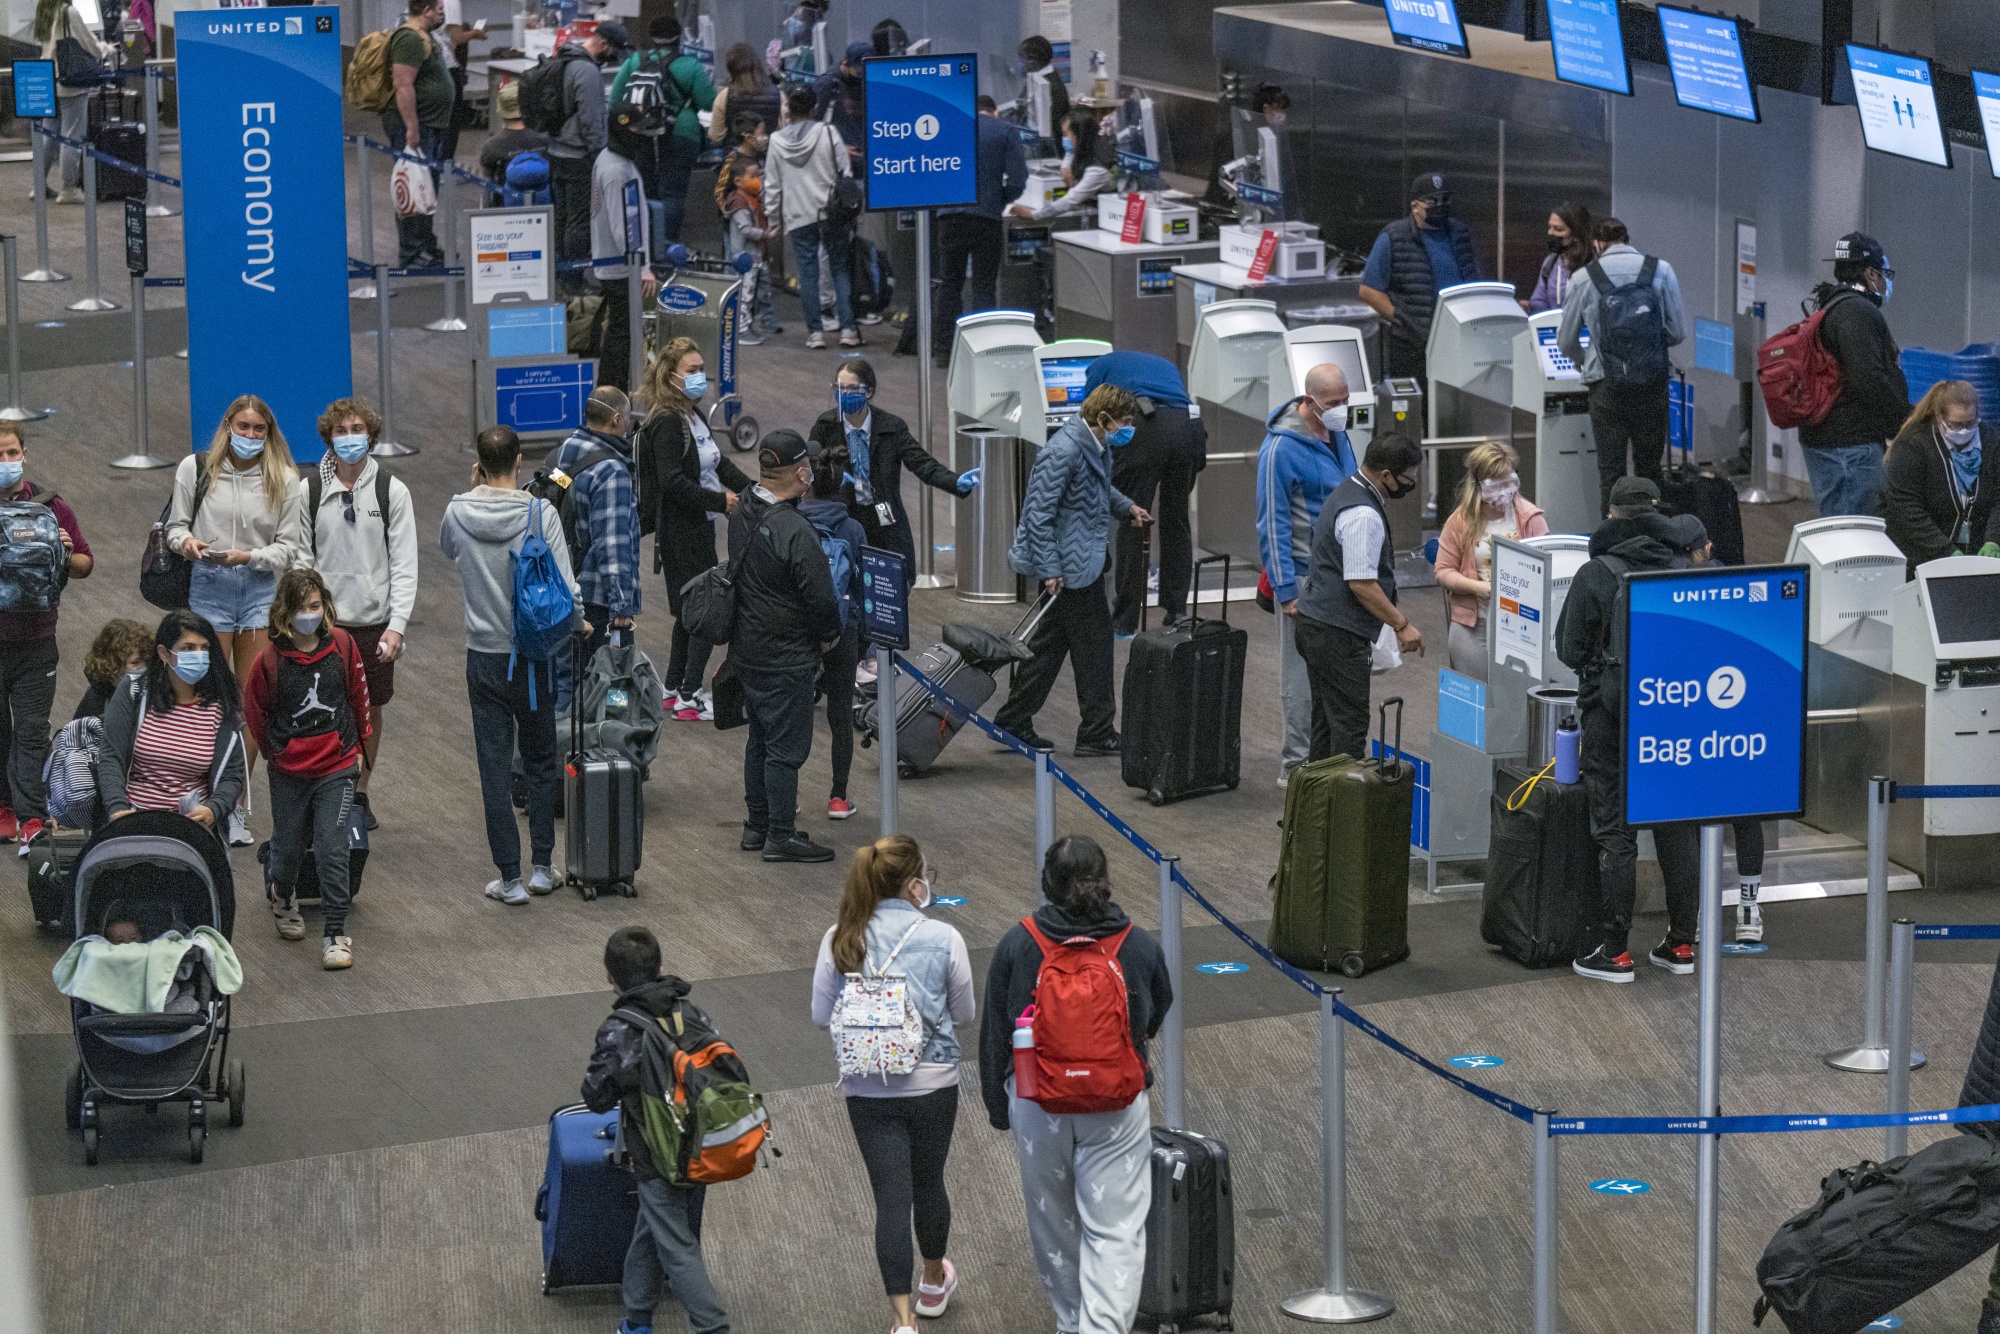 Travelers check in at a United Airlines check-in area at San Francisco International Airport (SFO) in San Francisco, California, on Monday.